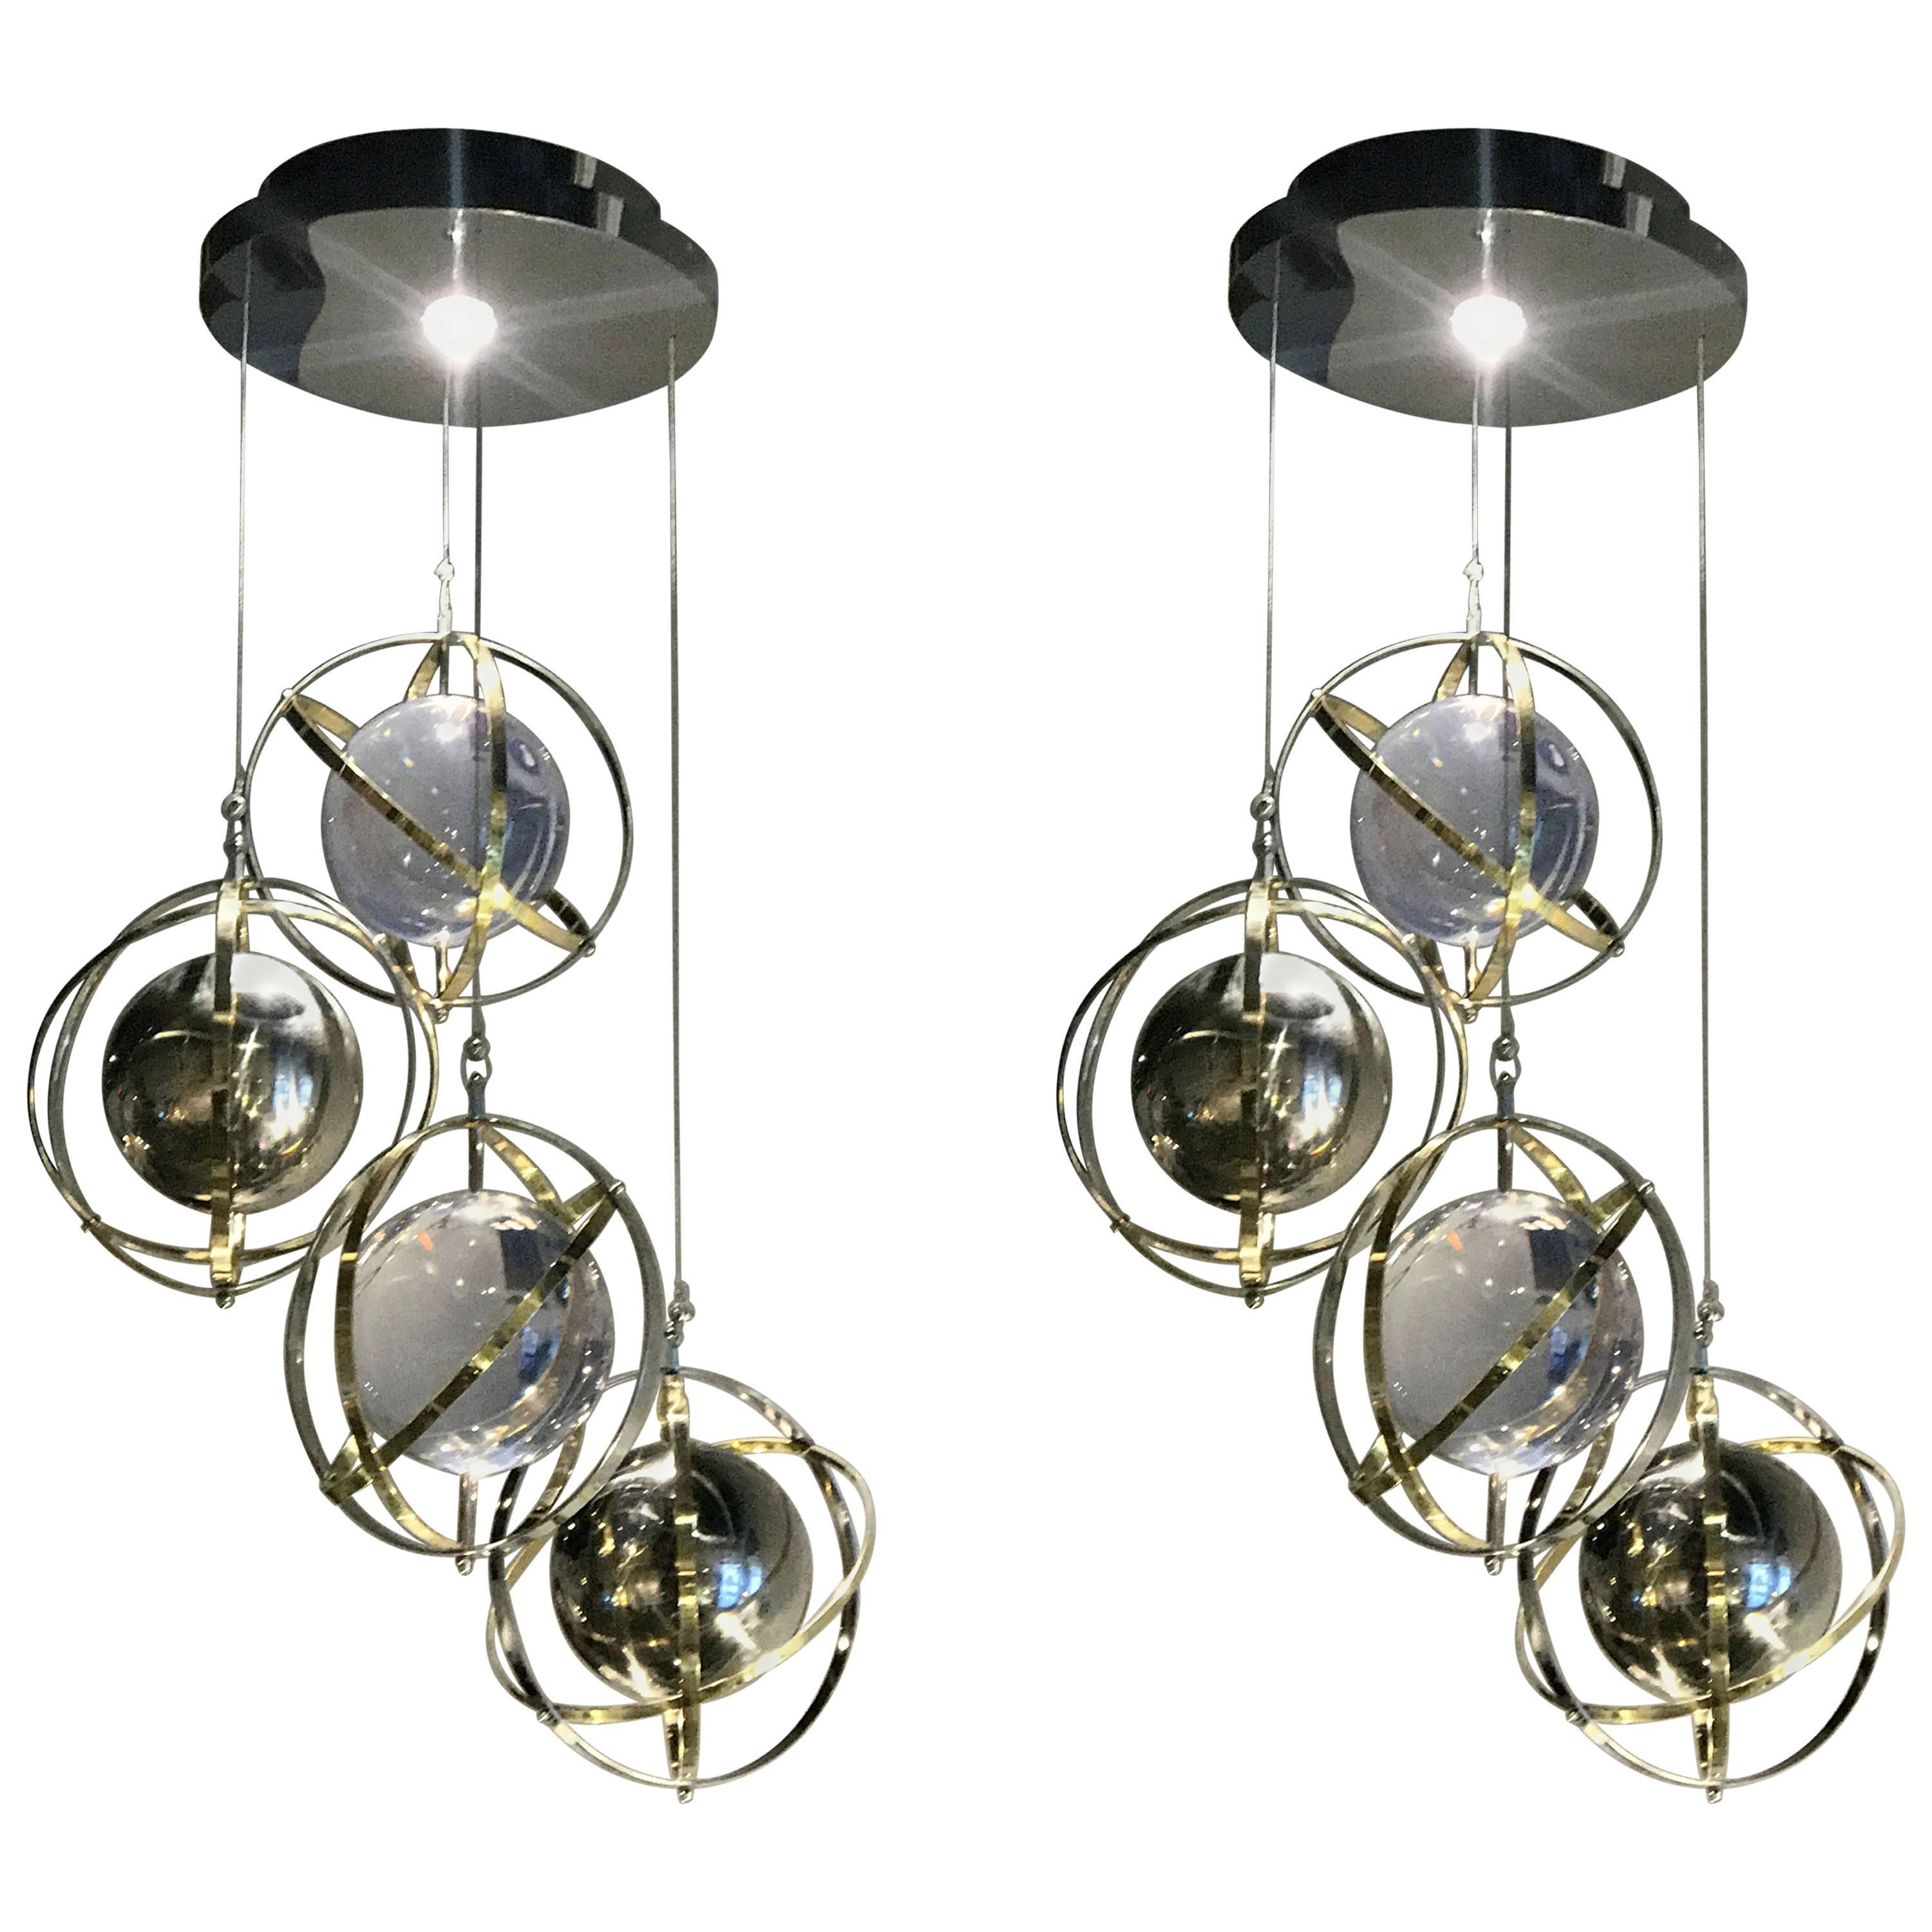 Pair of Brass, Stainless Steel and Lucite Armillary Sphere Chandeliers